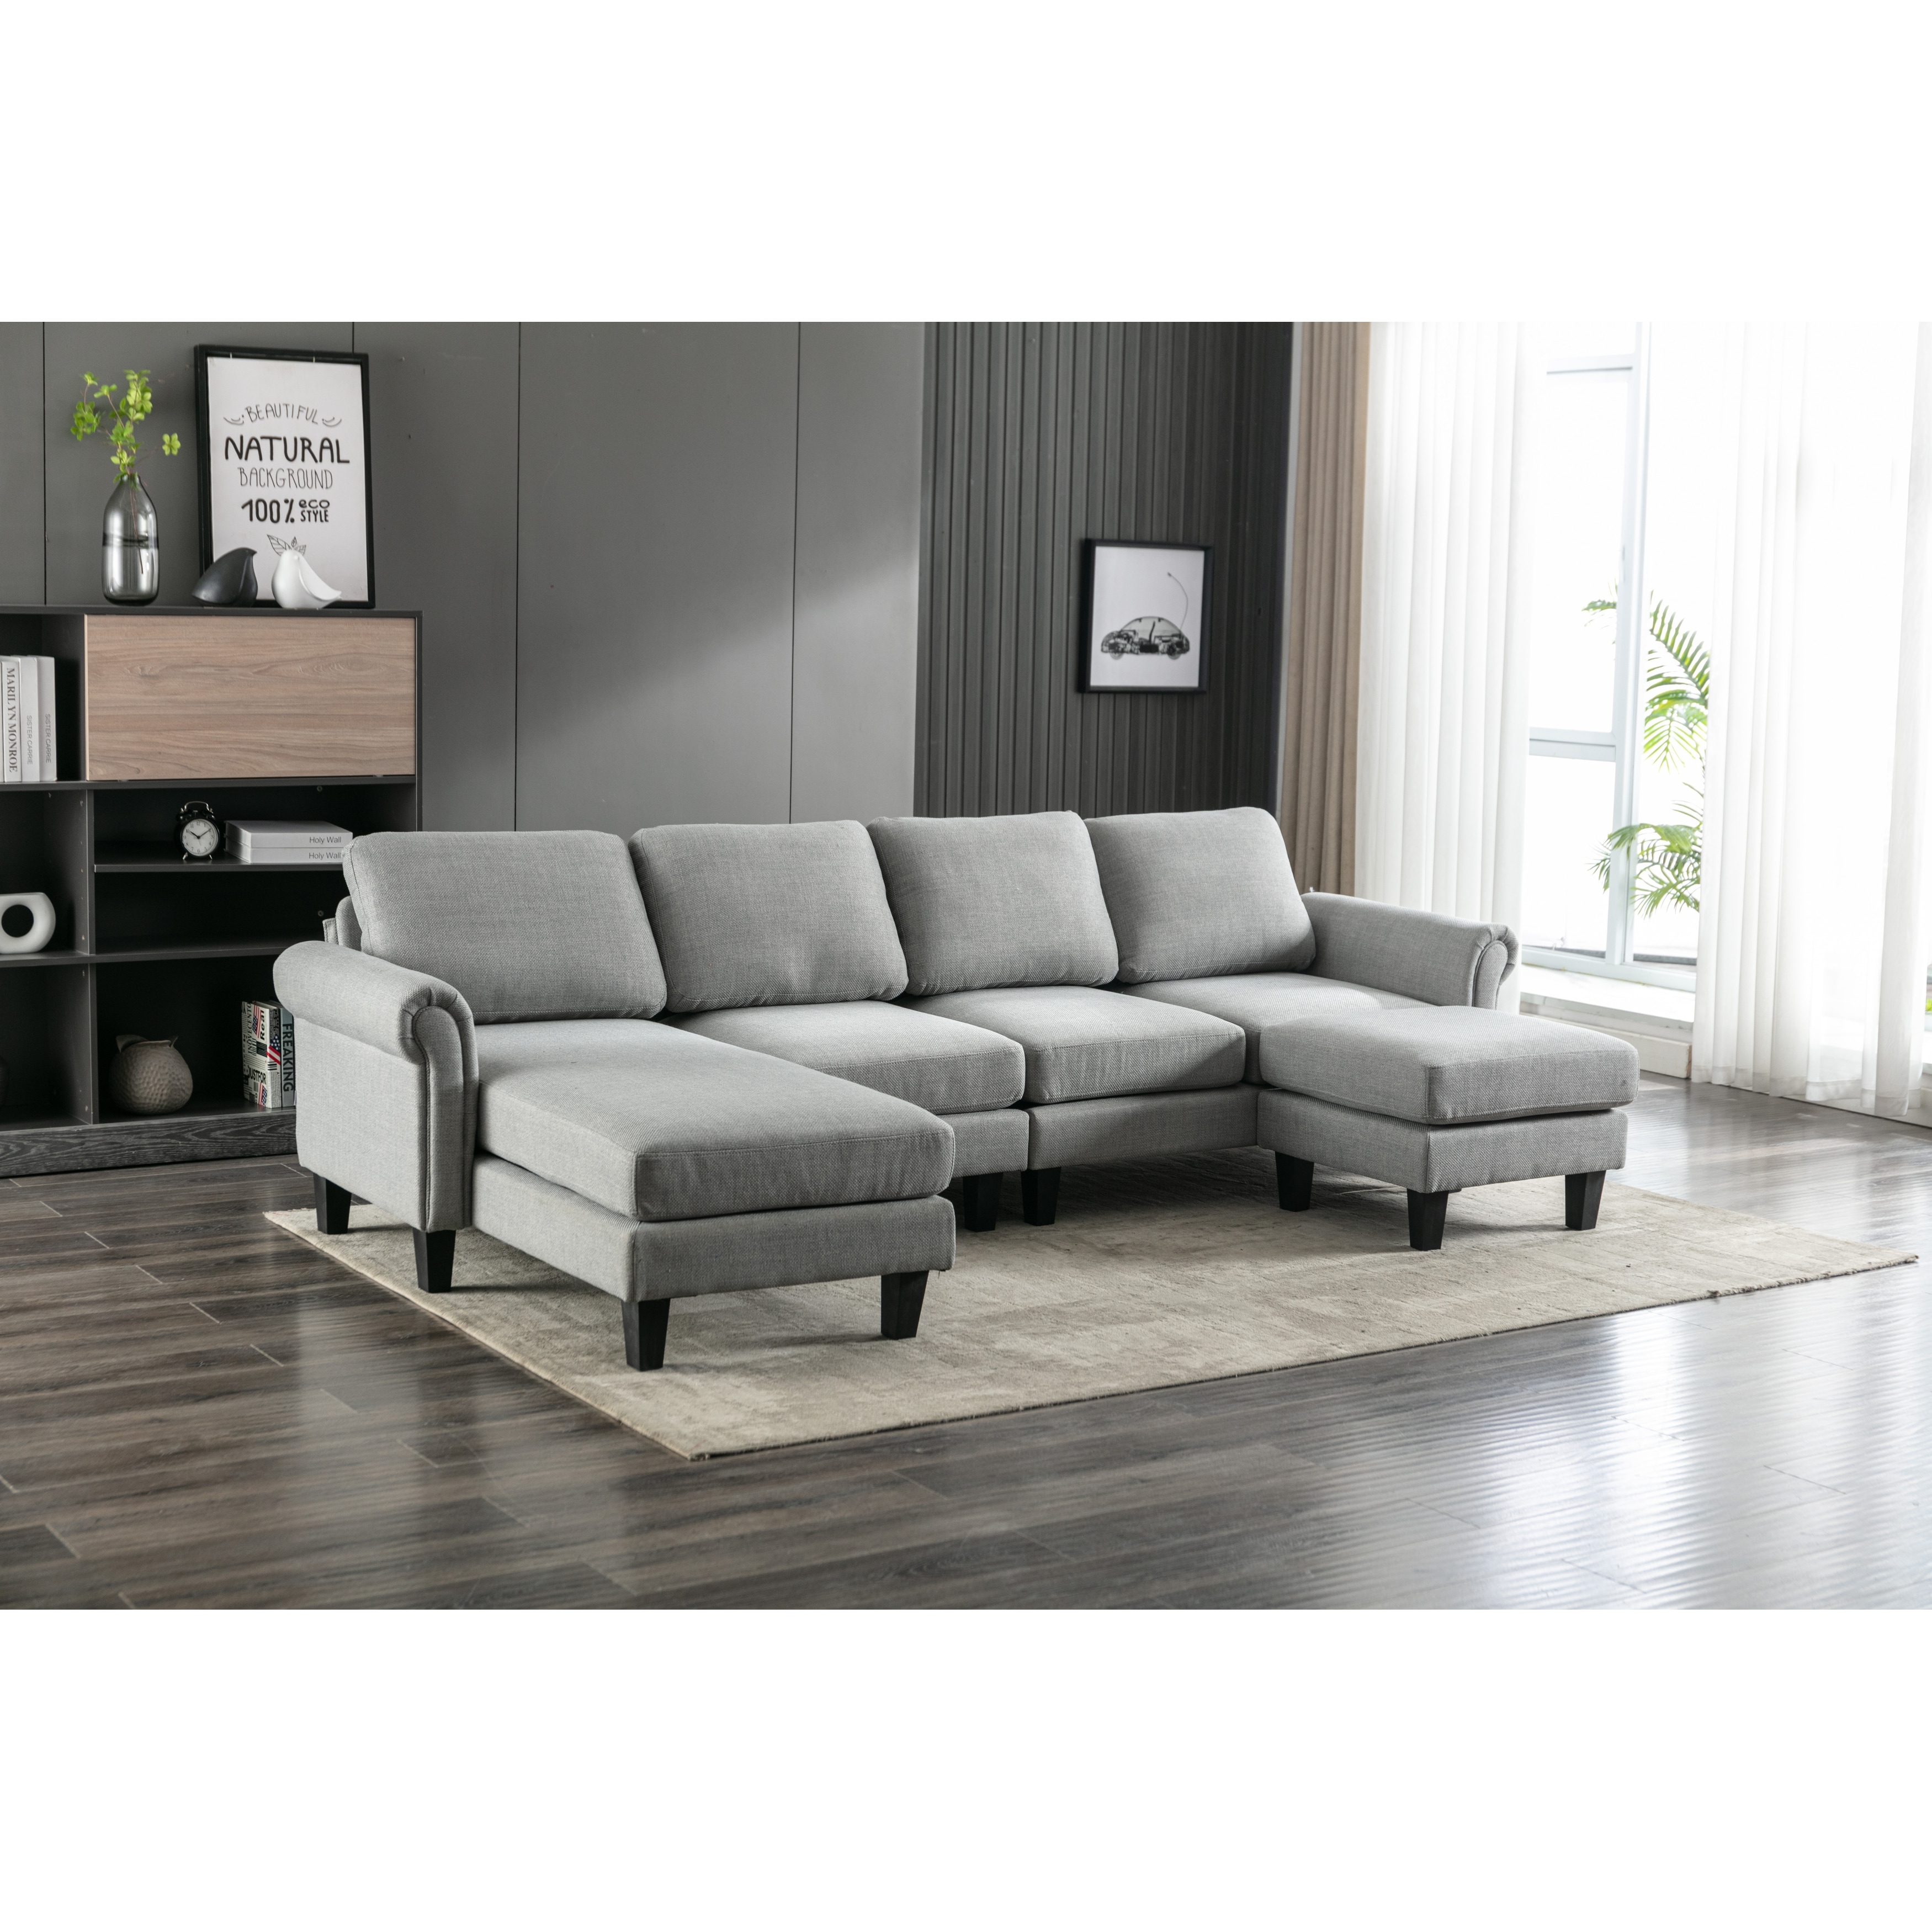 108.66 Inch 3-seater Convertible Segmented Sofa With Chaise Lounge And Convertible Ottoman  And Two Pillows